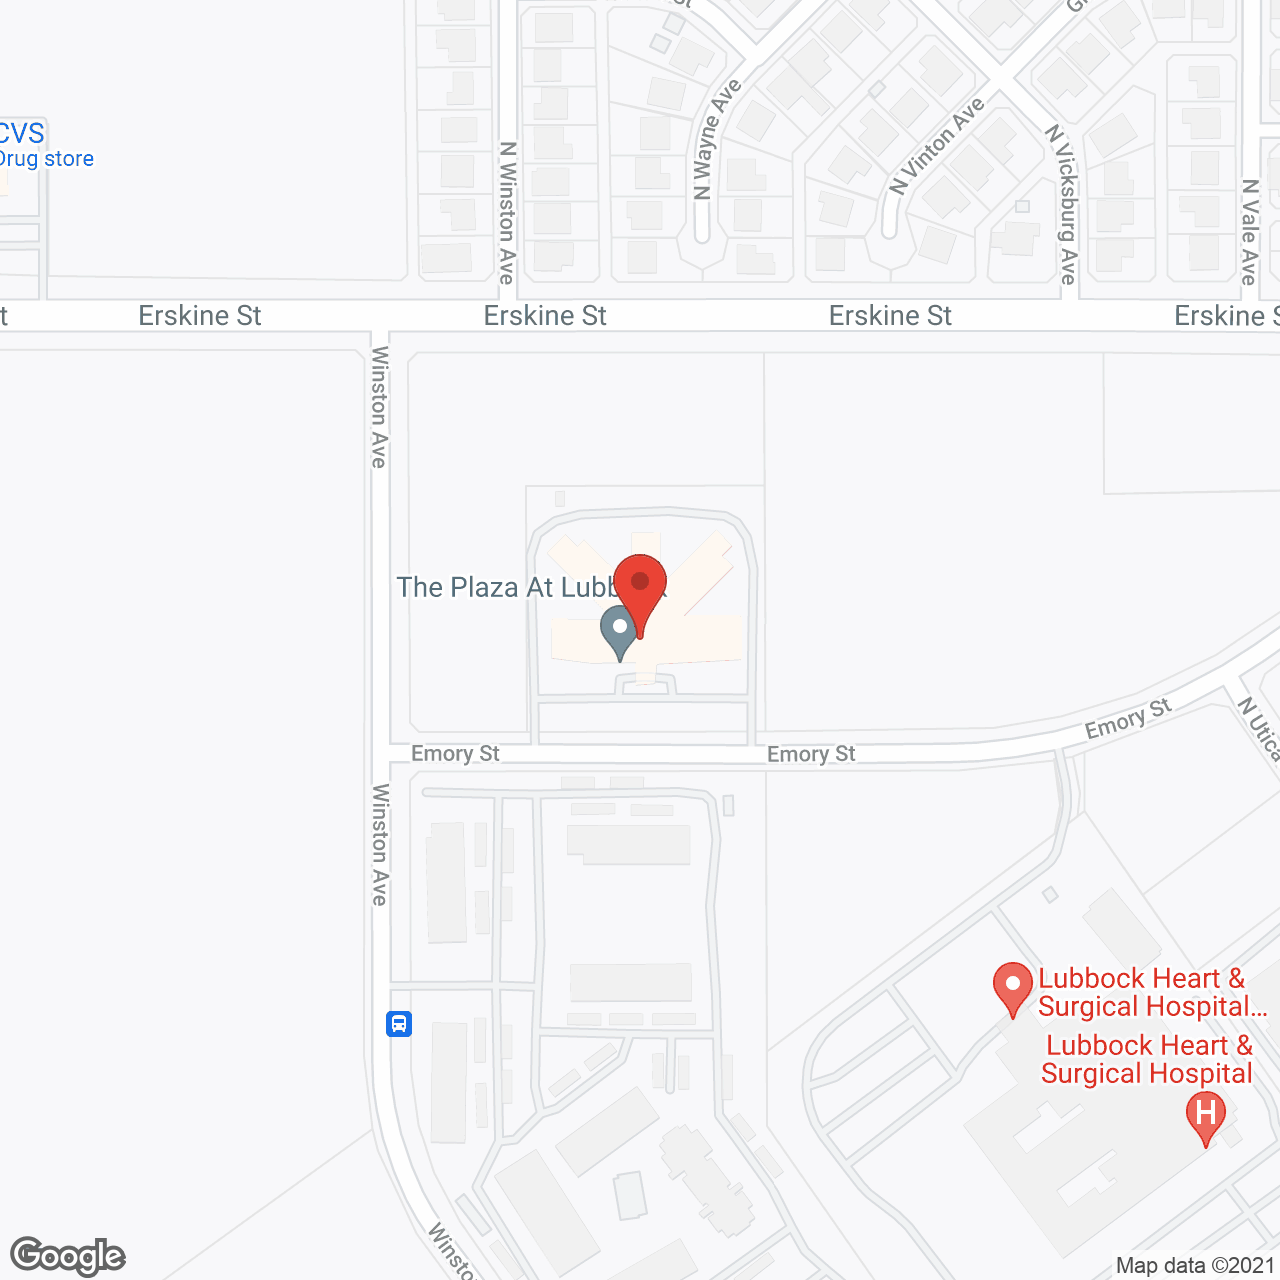 The Plaza At Lubbock in google map